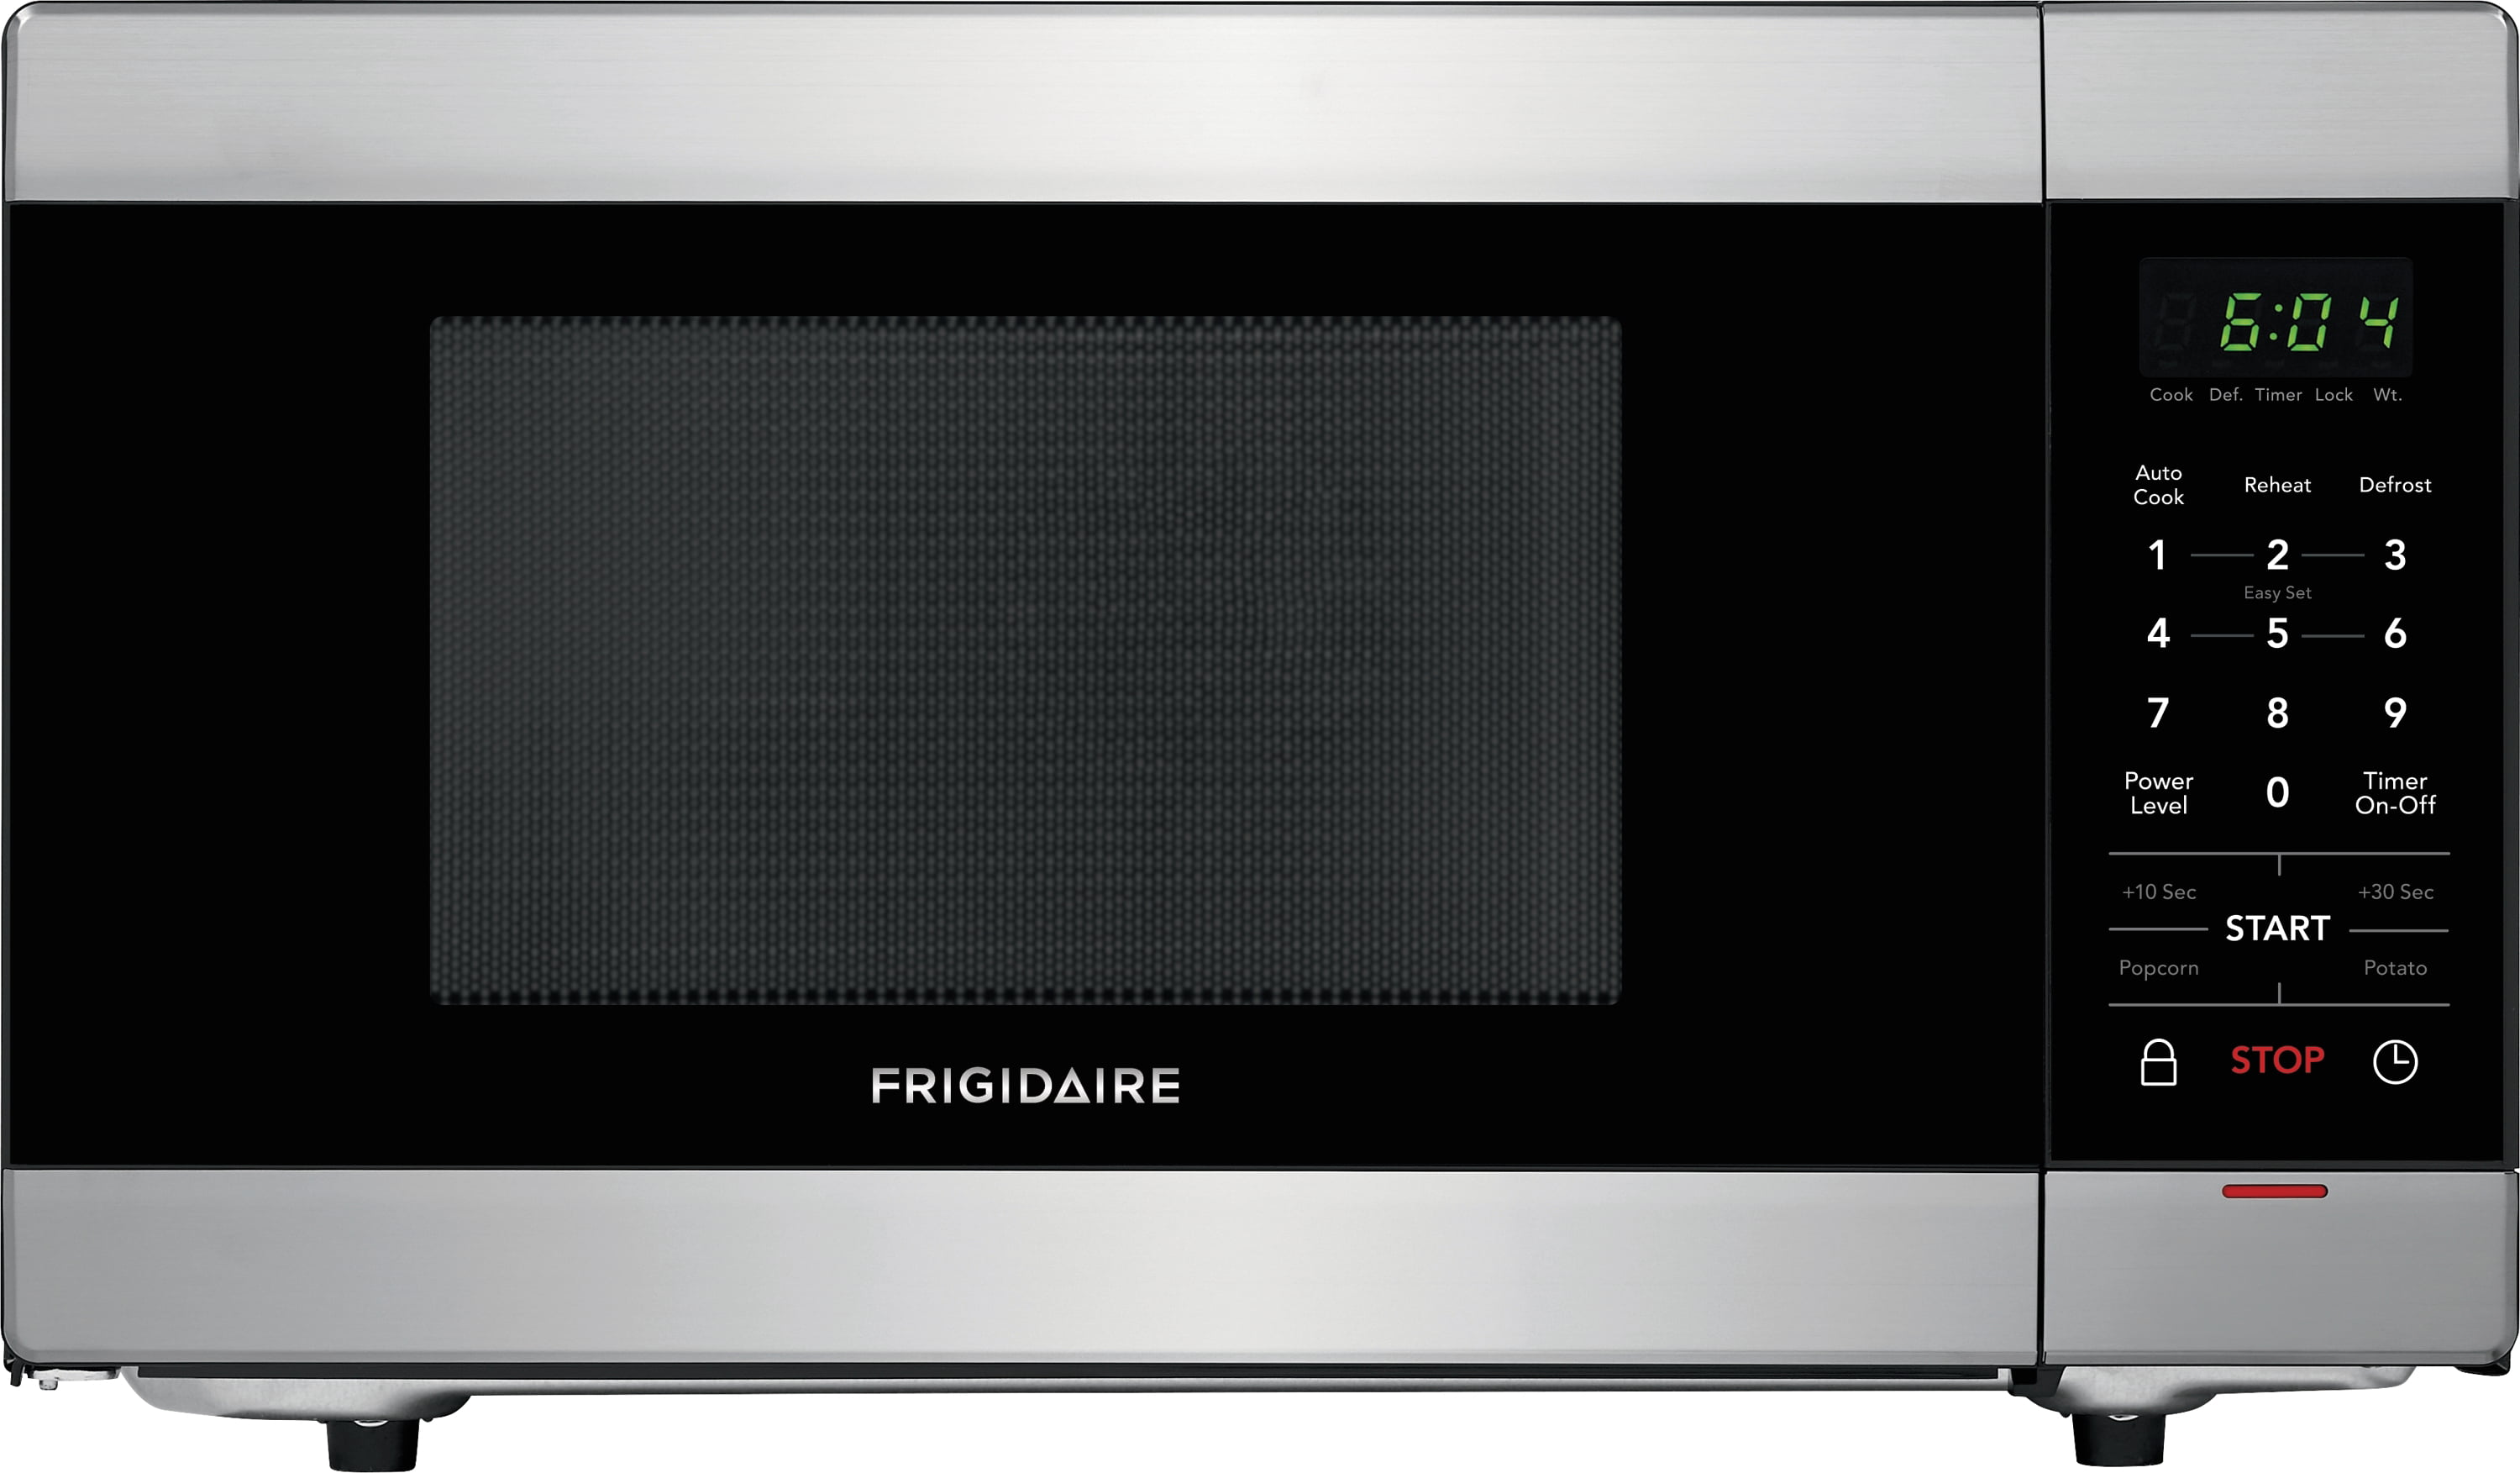 Frigidaire 1.1 Cu. Ft. Stainless Steel Microwave Oven - Walmart.com